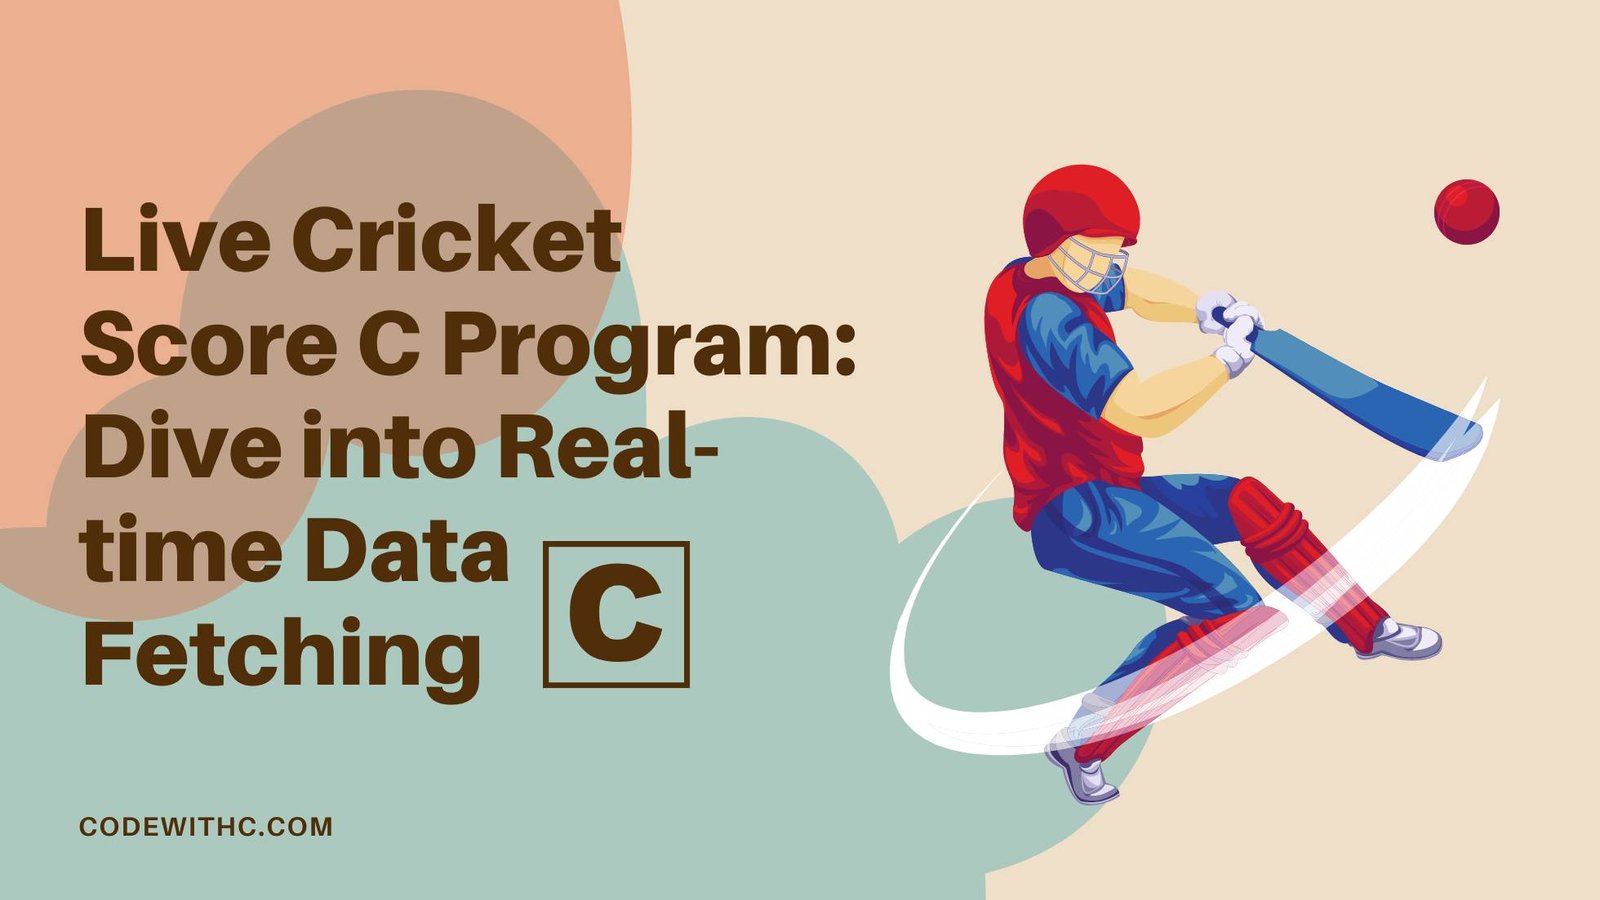 Live Cricket Score C Program Dive Into Real-time Data Fetching